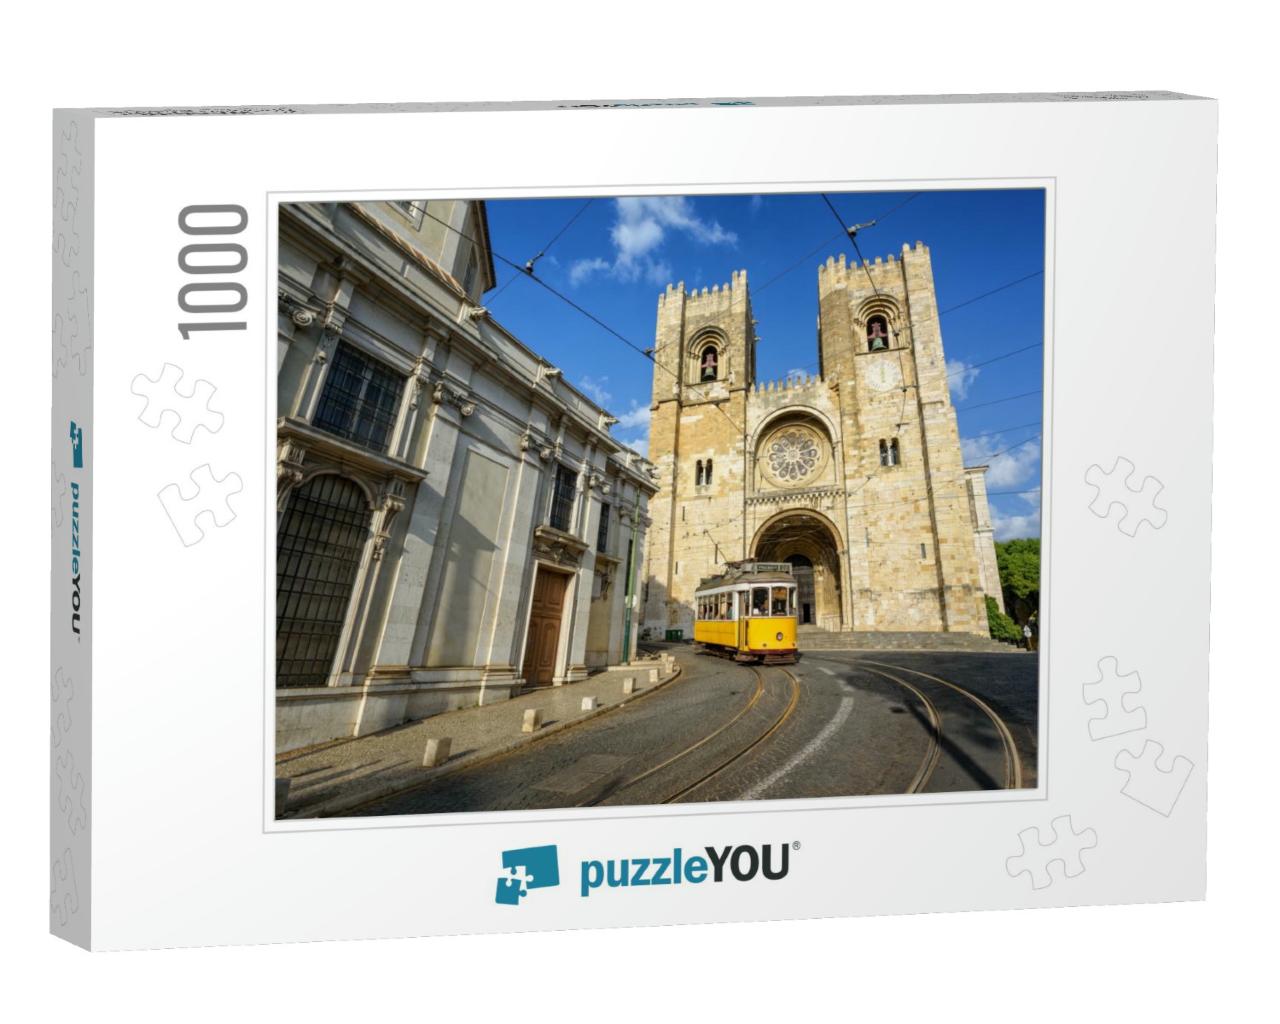 Old Tram in Front of Cathedral in Lisbon, Portugal... Jigsaw Puzzle with 1000 pieces